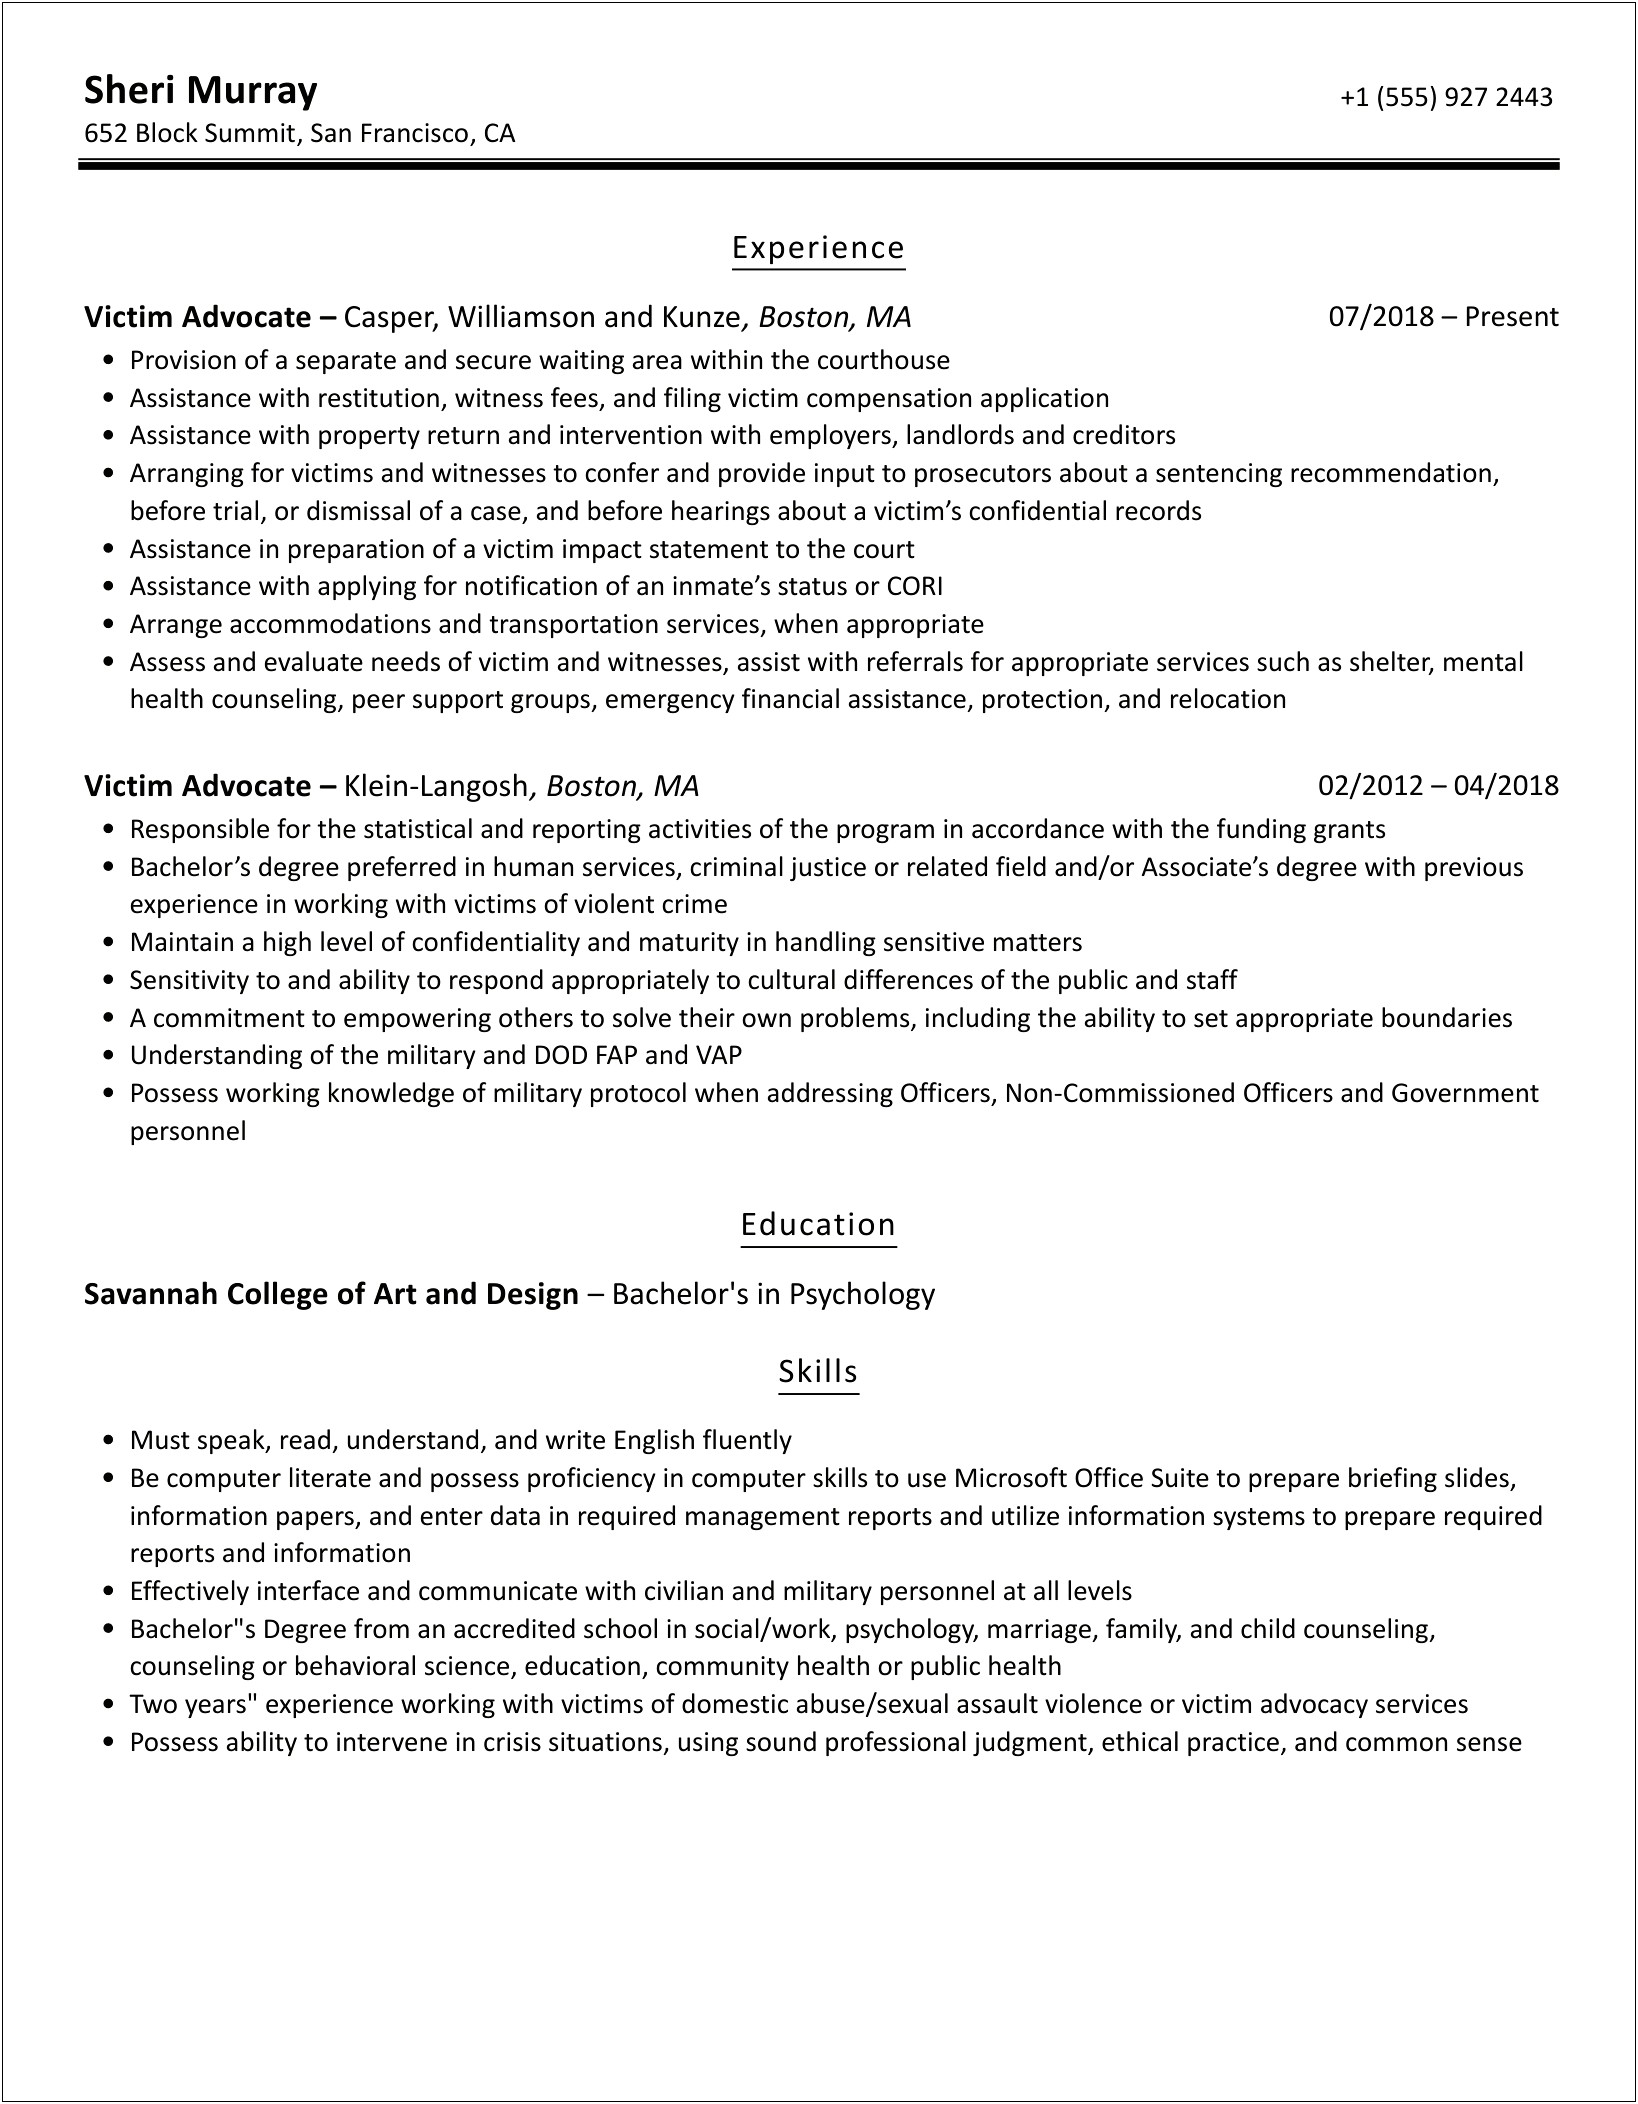 Good Resume Summary For A Victim Advocate